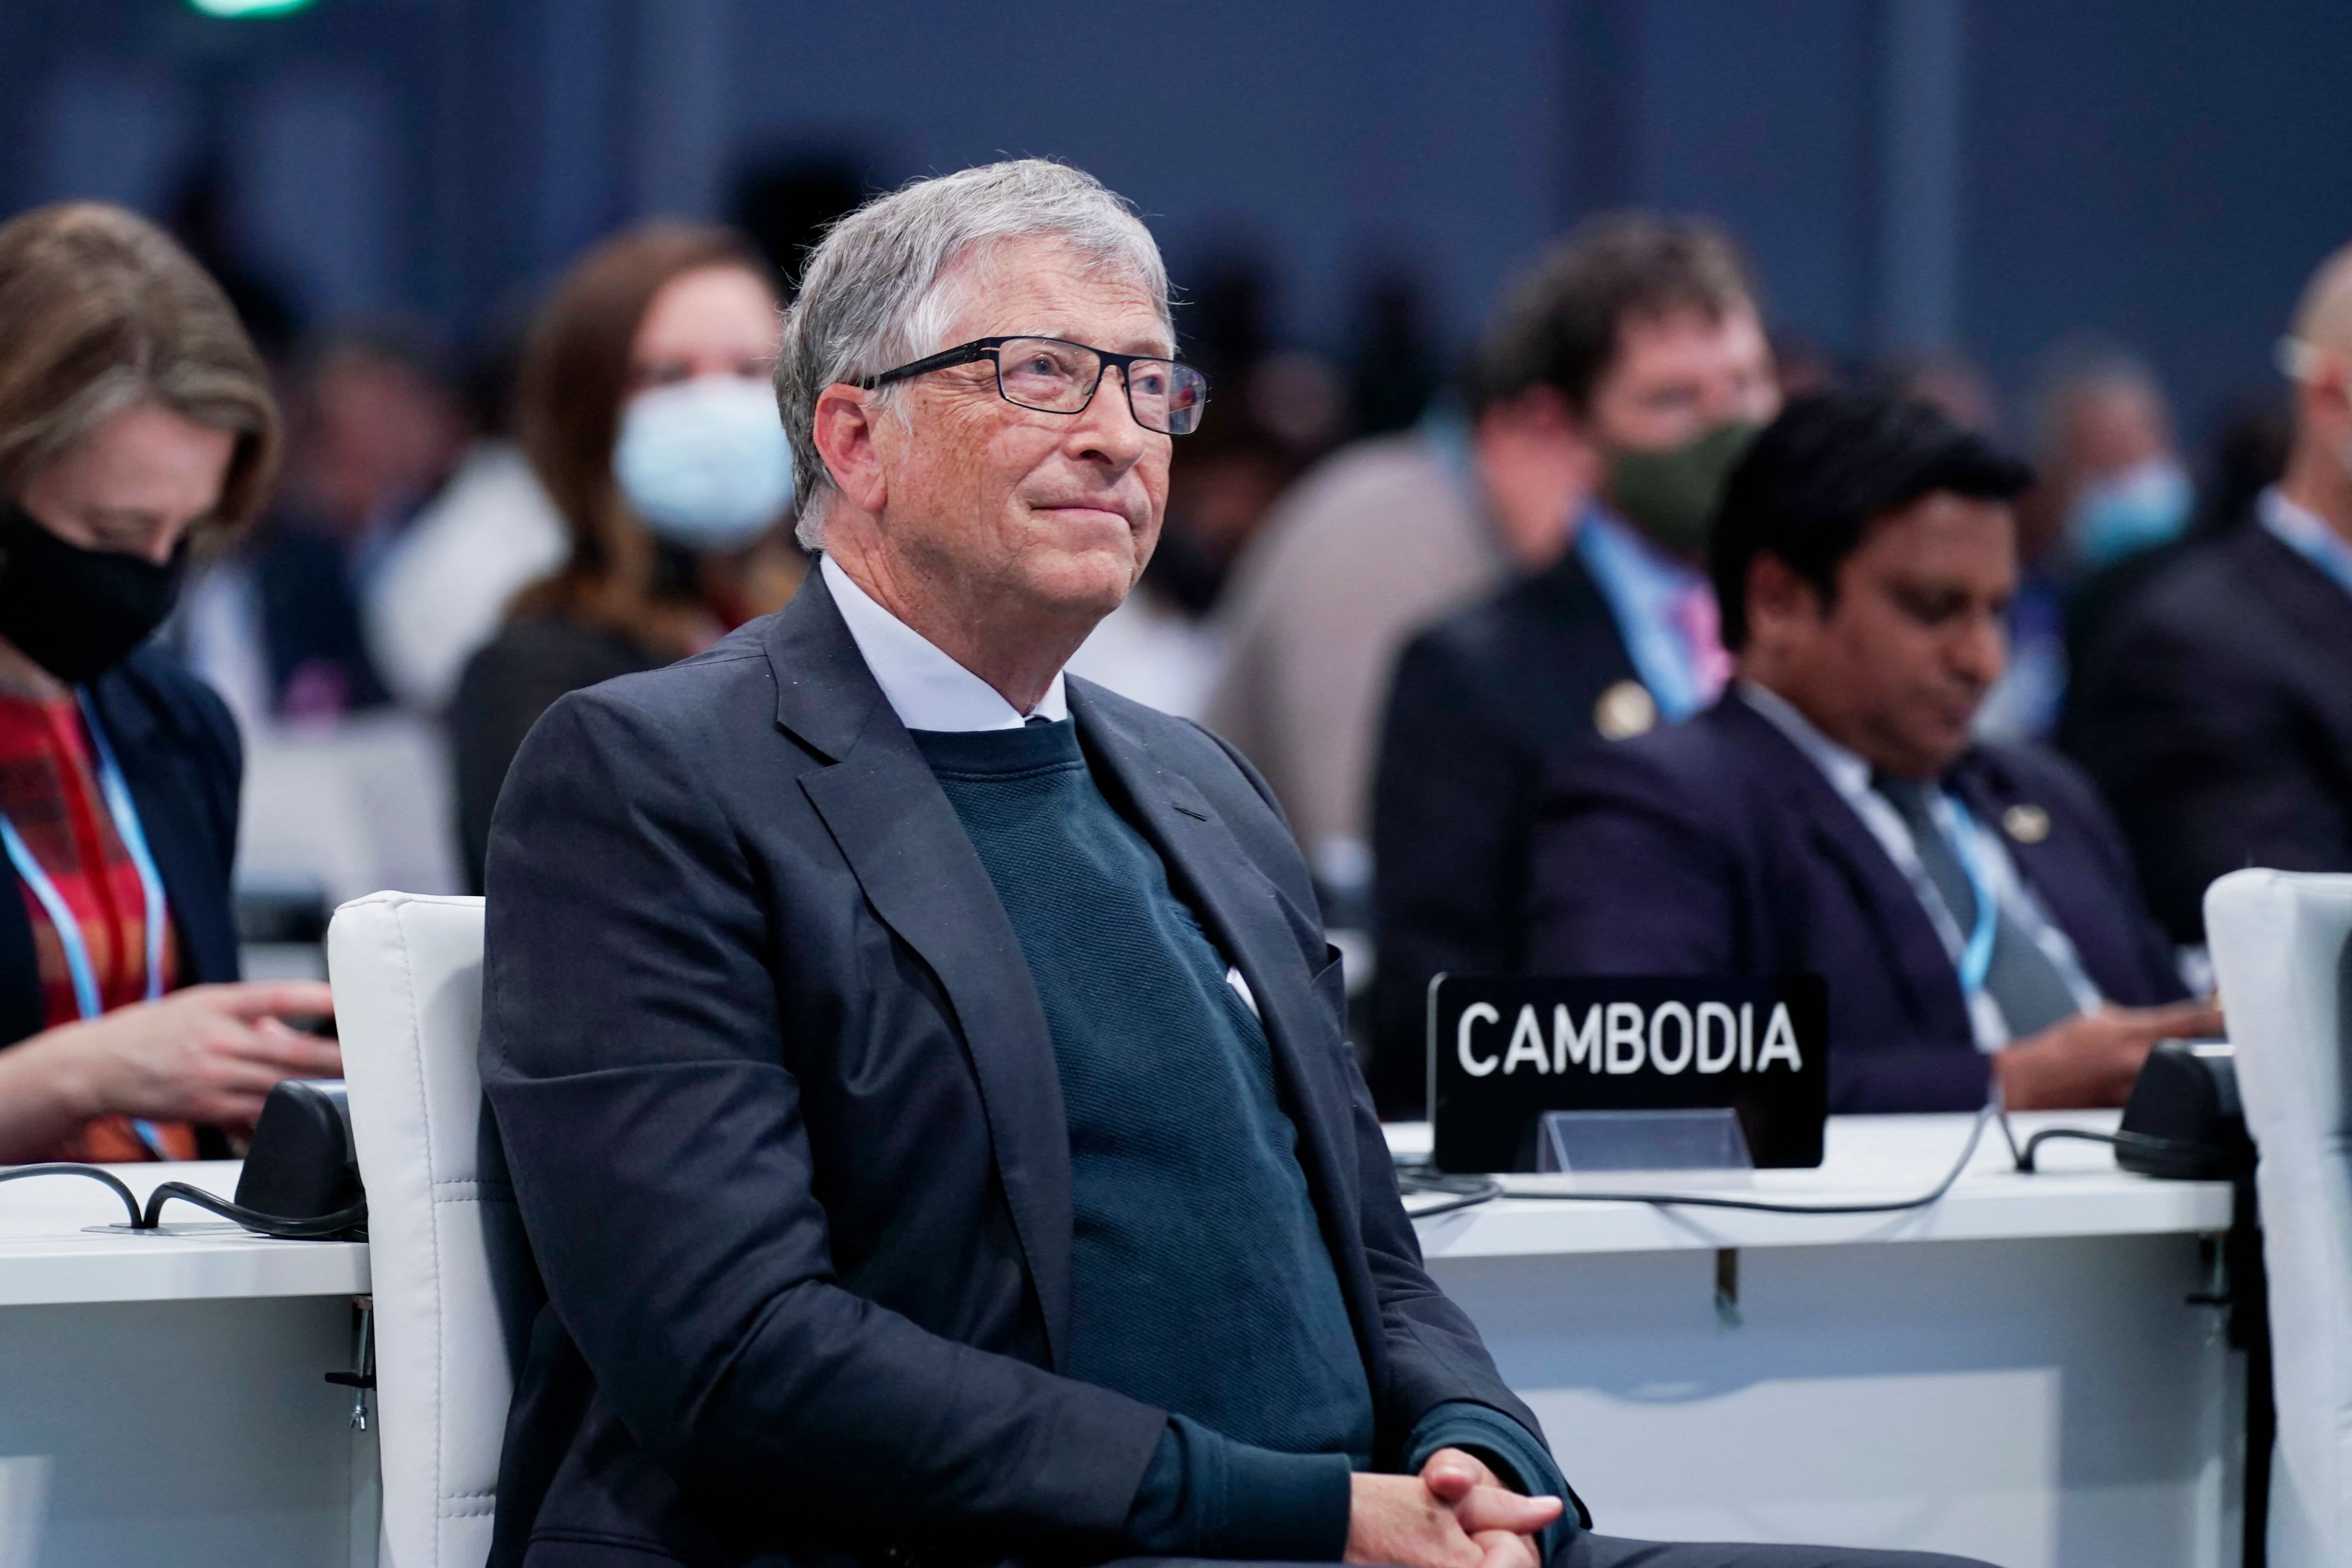 Bill Gates doubts goal of limiting global warming to 1.5 degrees is achievable – CNBC